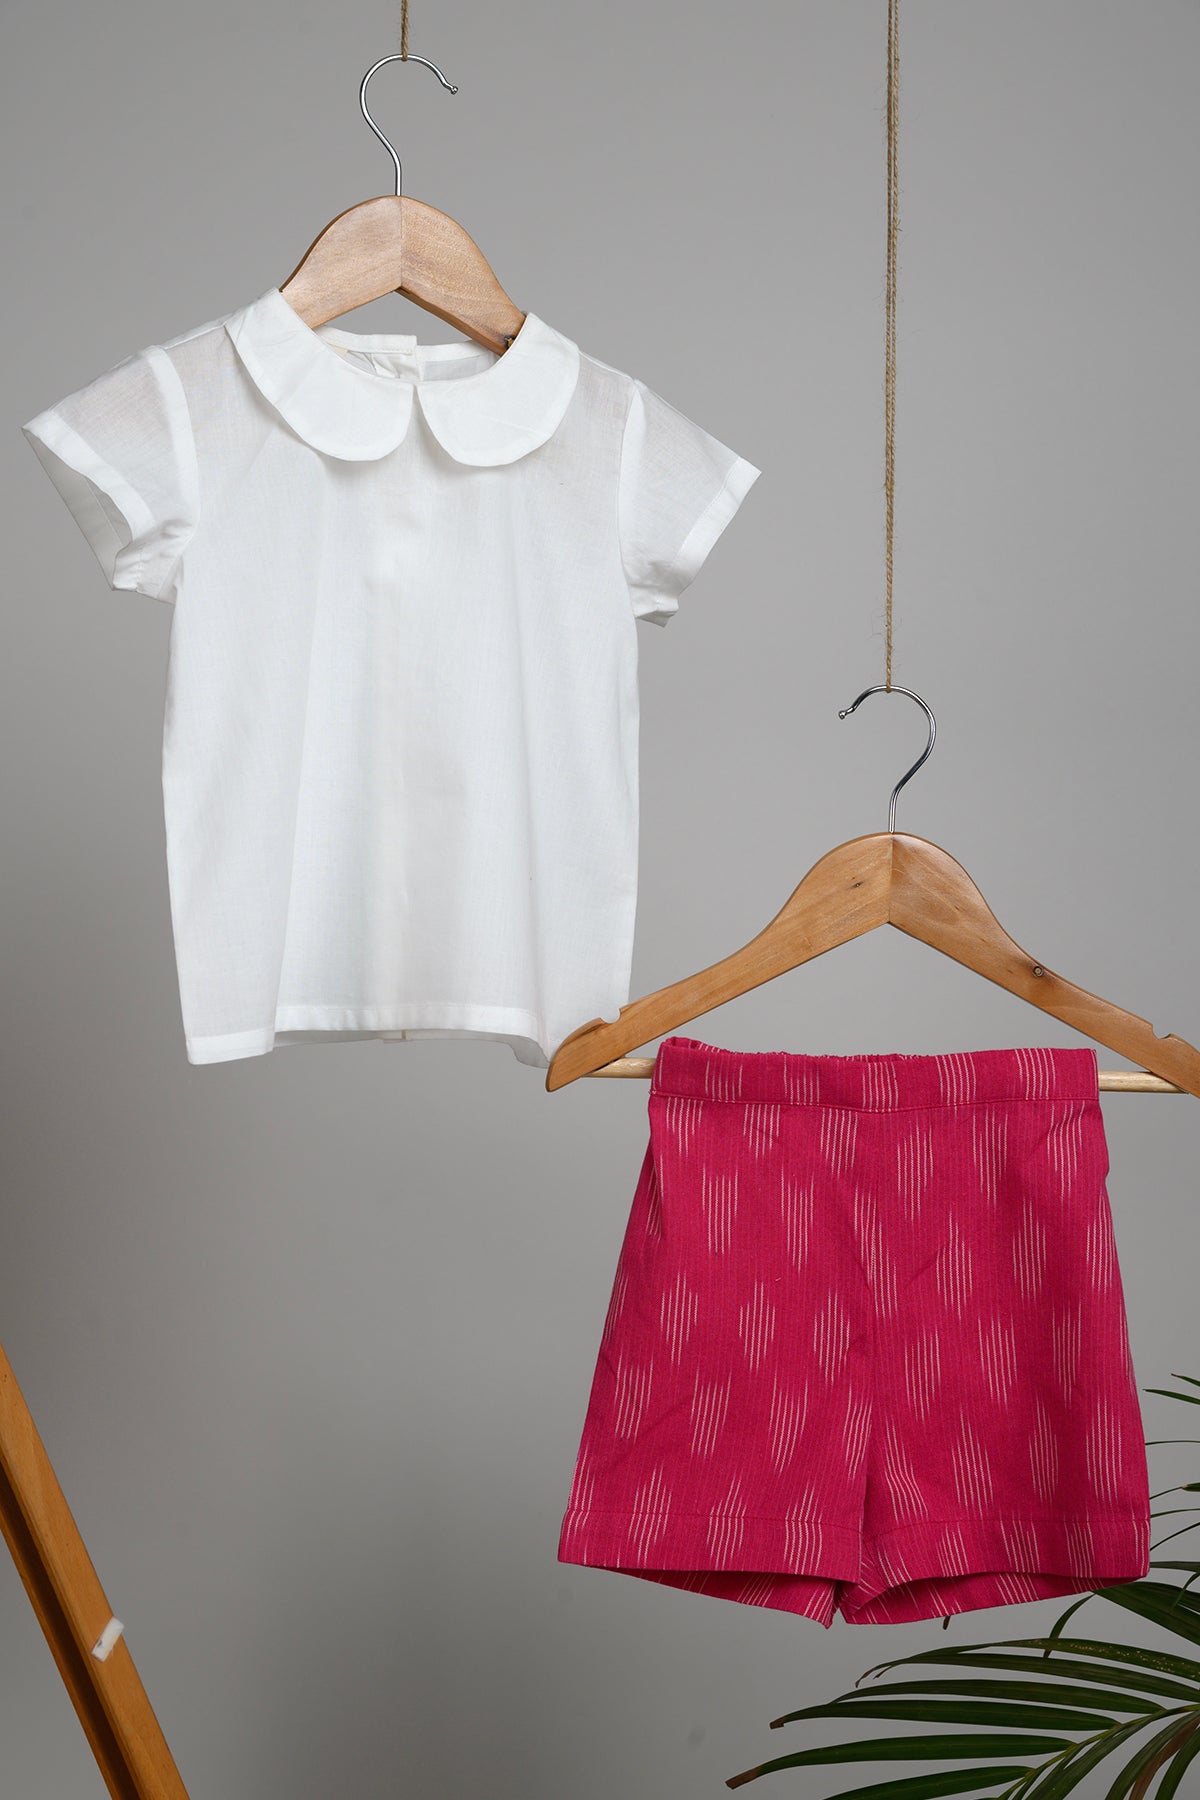 Pooh White Peter Pan Collar Top and Pink Ikat Shorts for Kids